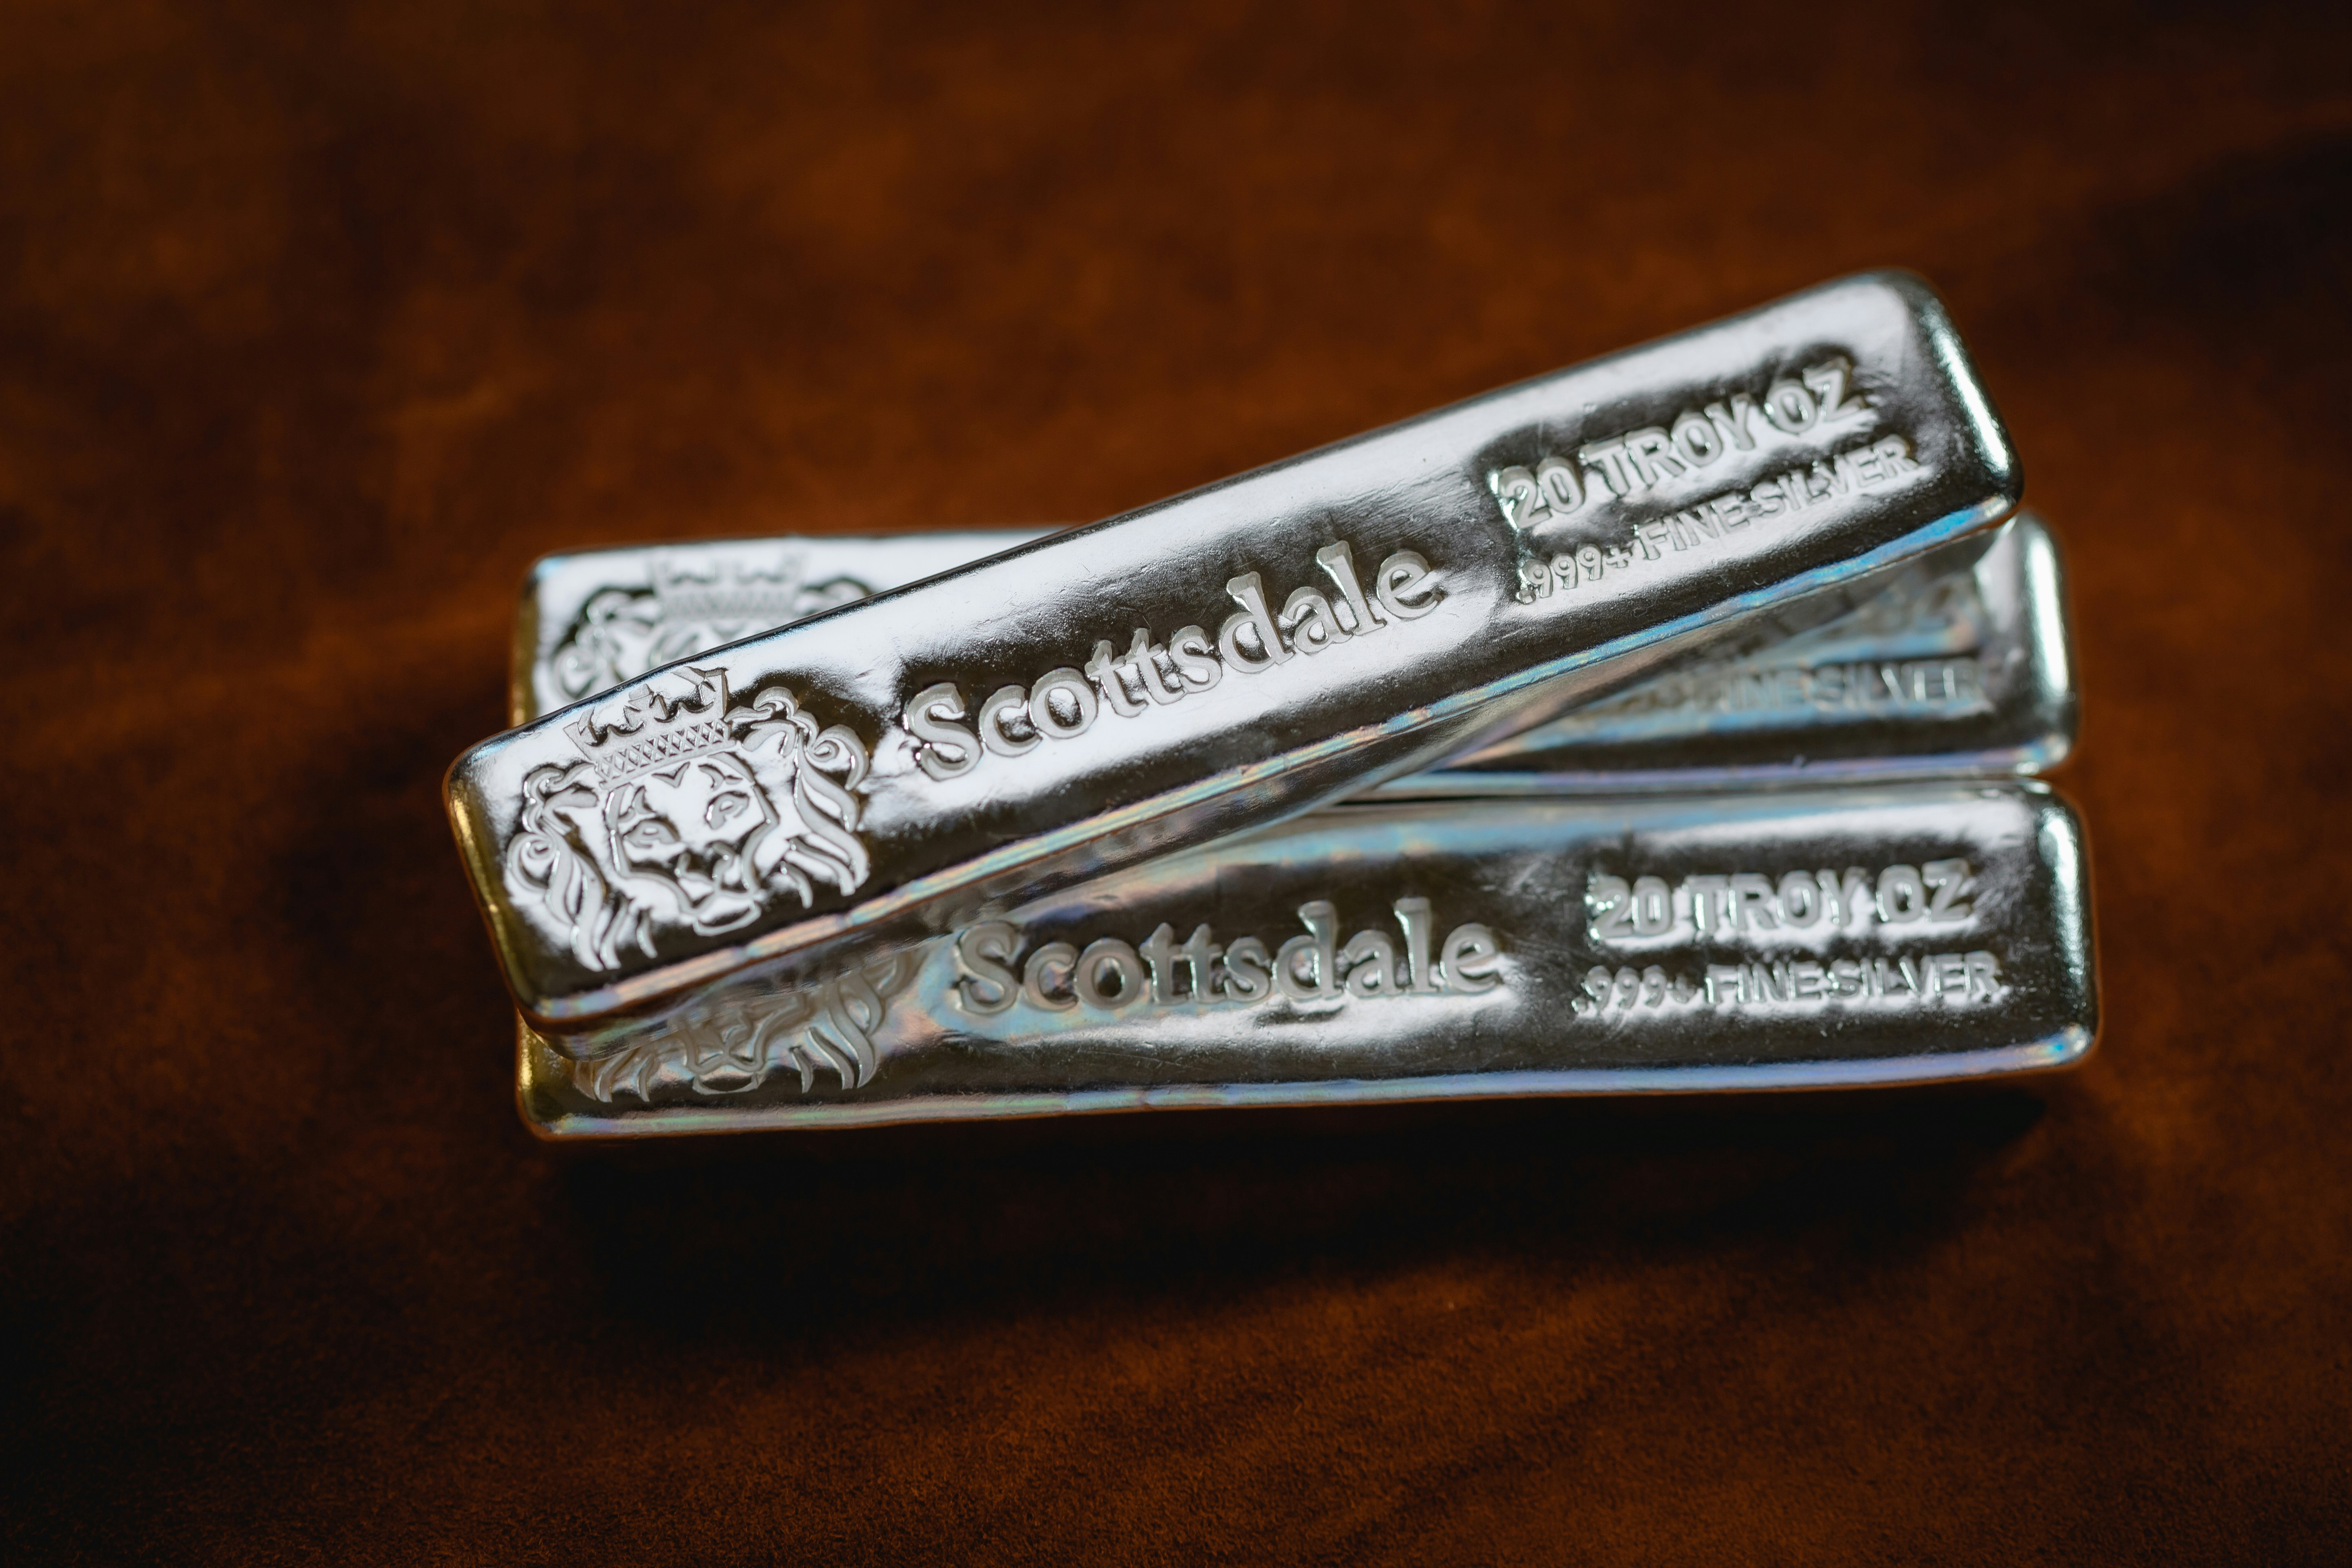 20 oz Scottsdale Cast Silver Bars sitting on a dark background. 🇺🇸 Minting Gold/Silver in AZ, Legal Tender for 20+ Countries Creator of Silver Stacker® Bars . We are a US private mint based in Scottsdale Arizona. We design, manufacture and deliver the best silver and gold coins and bars on the market for both consumers, banks and governments around the world.